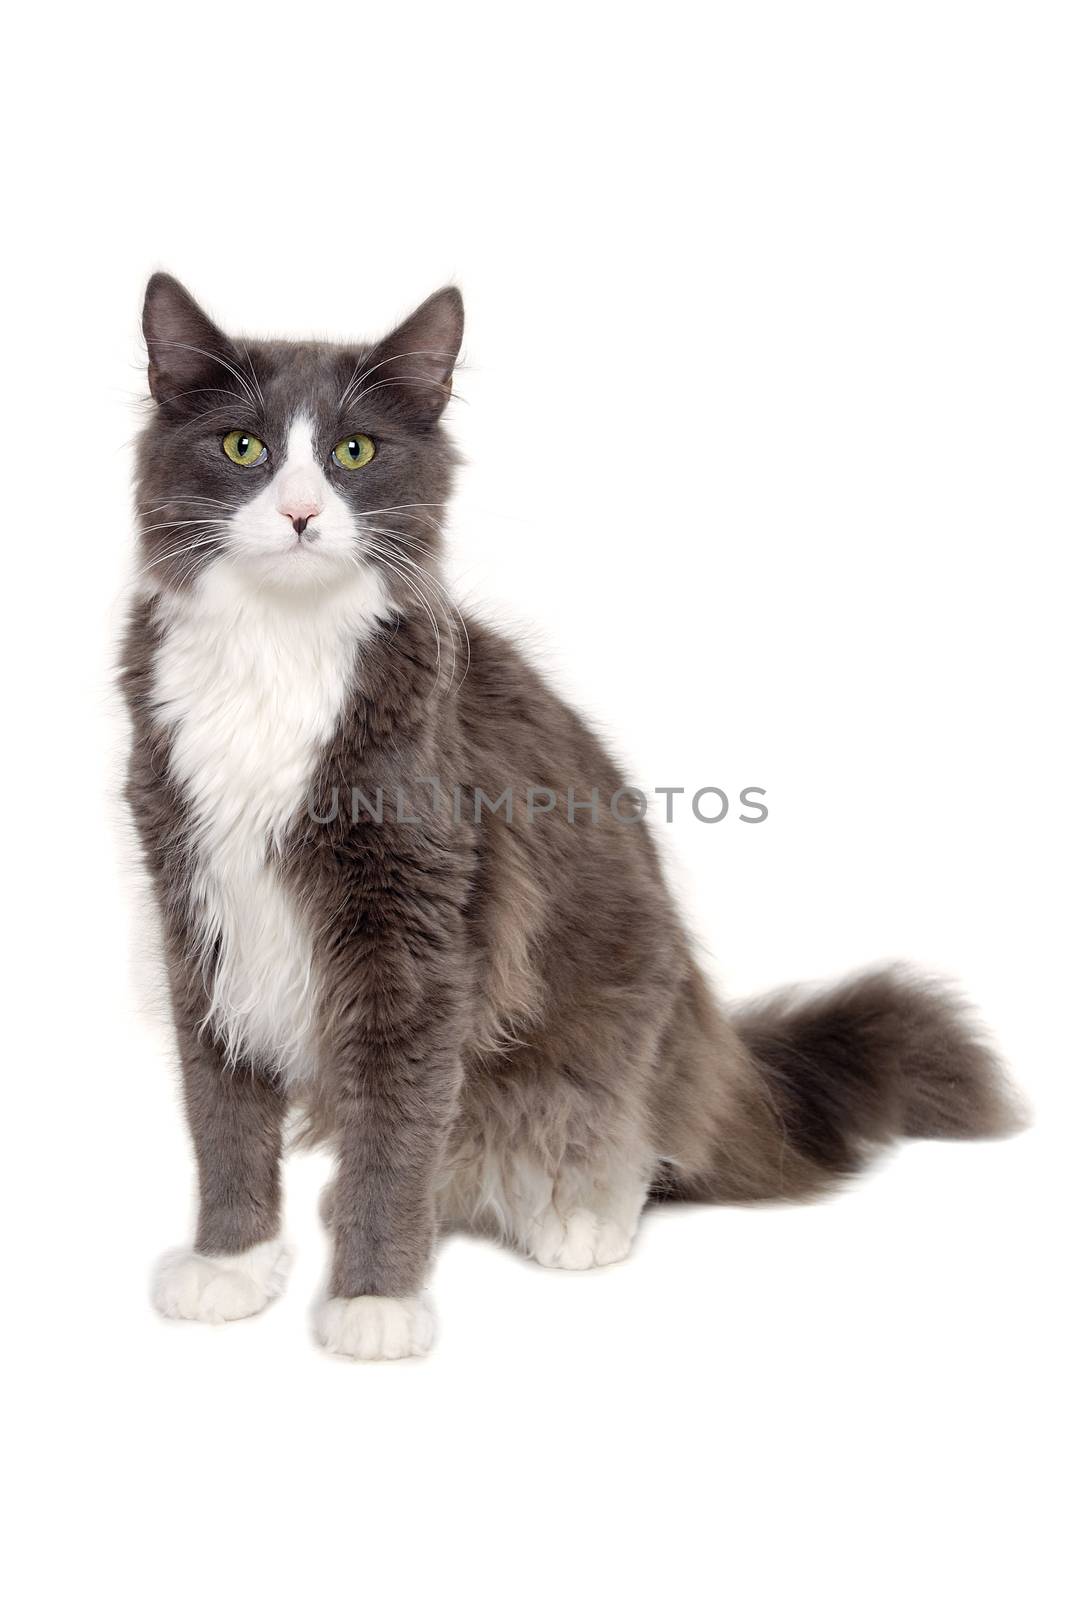 Gray cat sitting on a white background